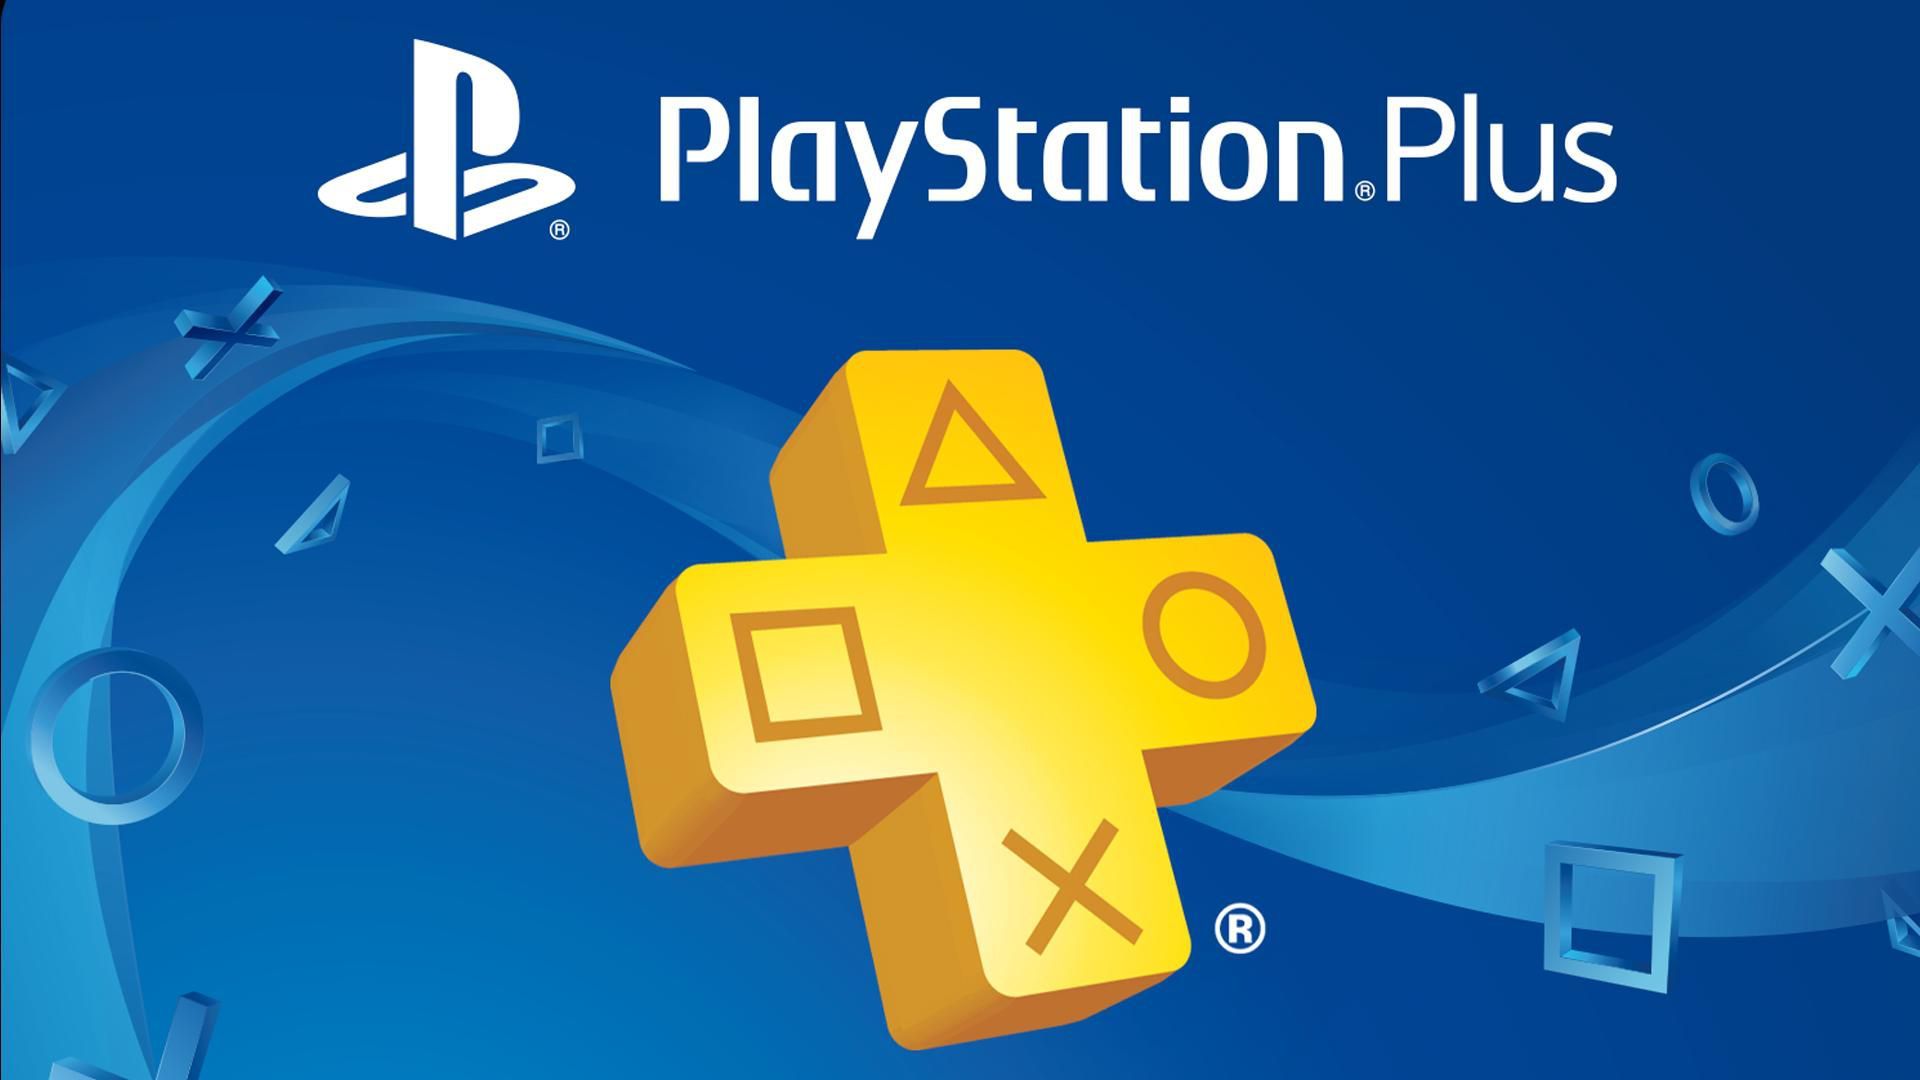 PlayStation Plus game pass